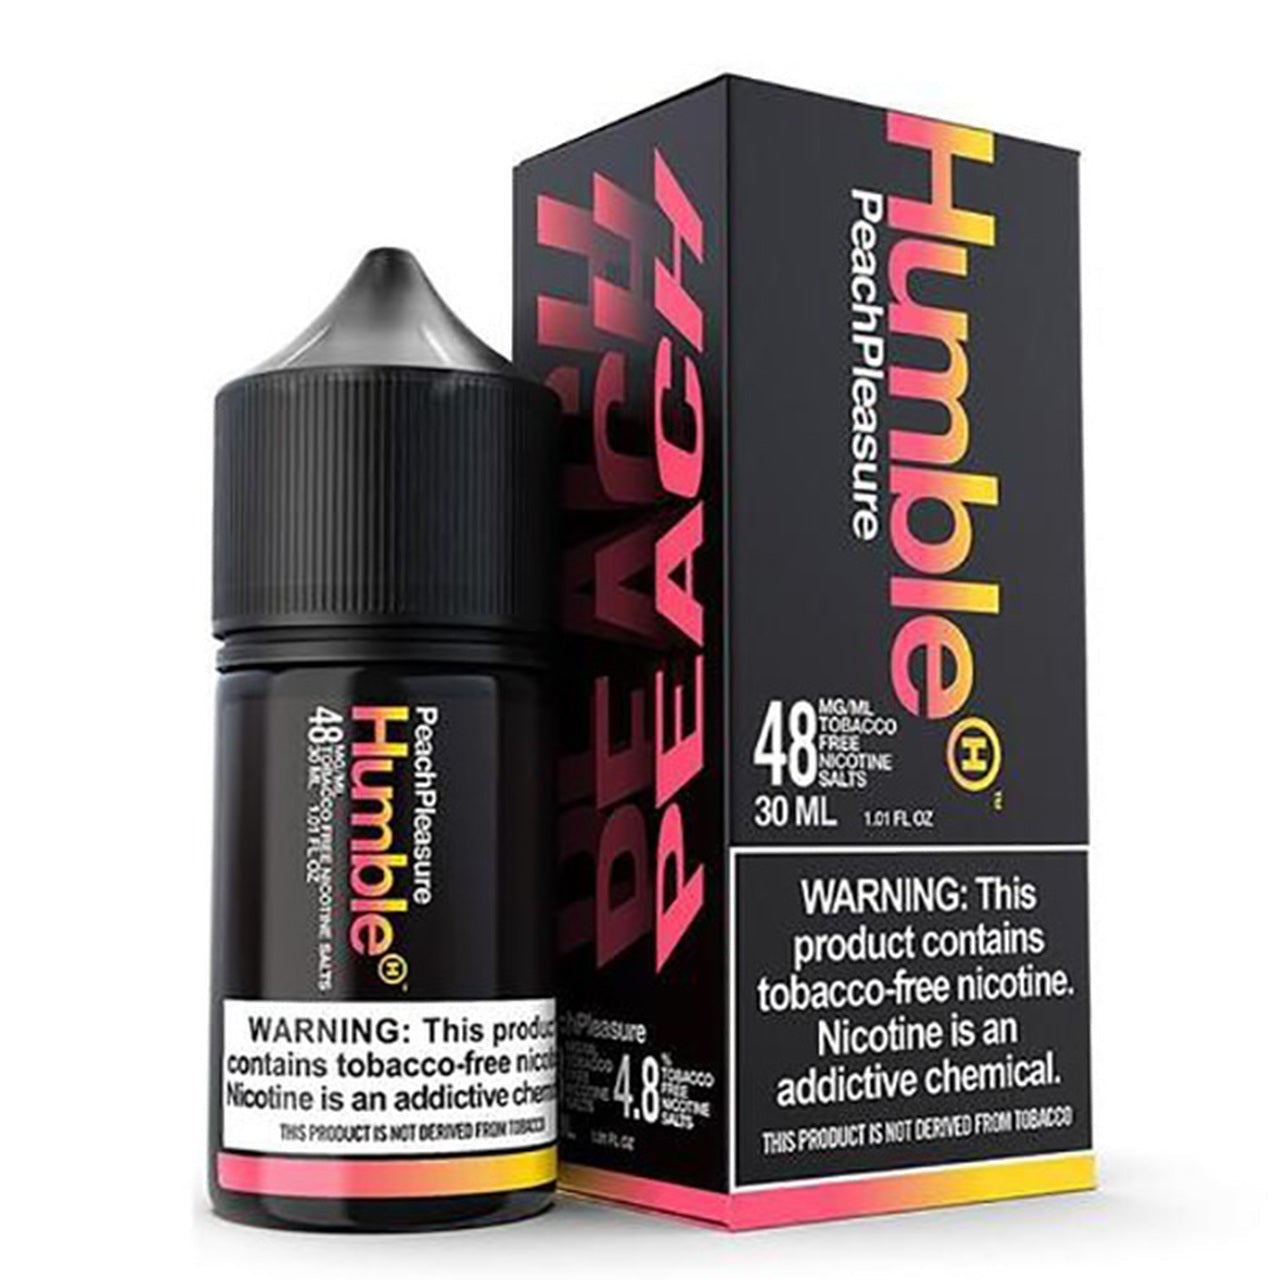 Peach Pleasure By Humble Salts Tobacco-Free Nicotine Series 30mL with Packaging